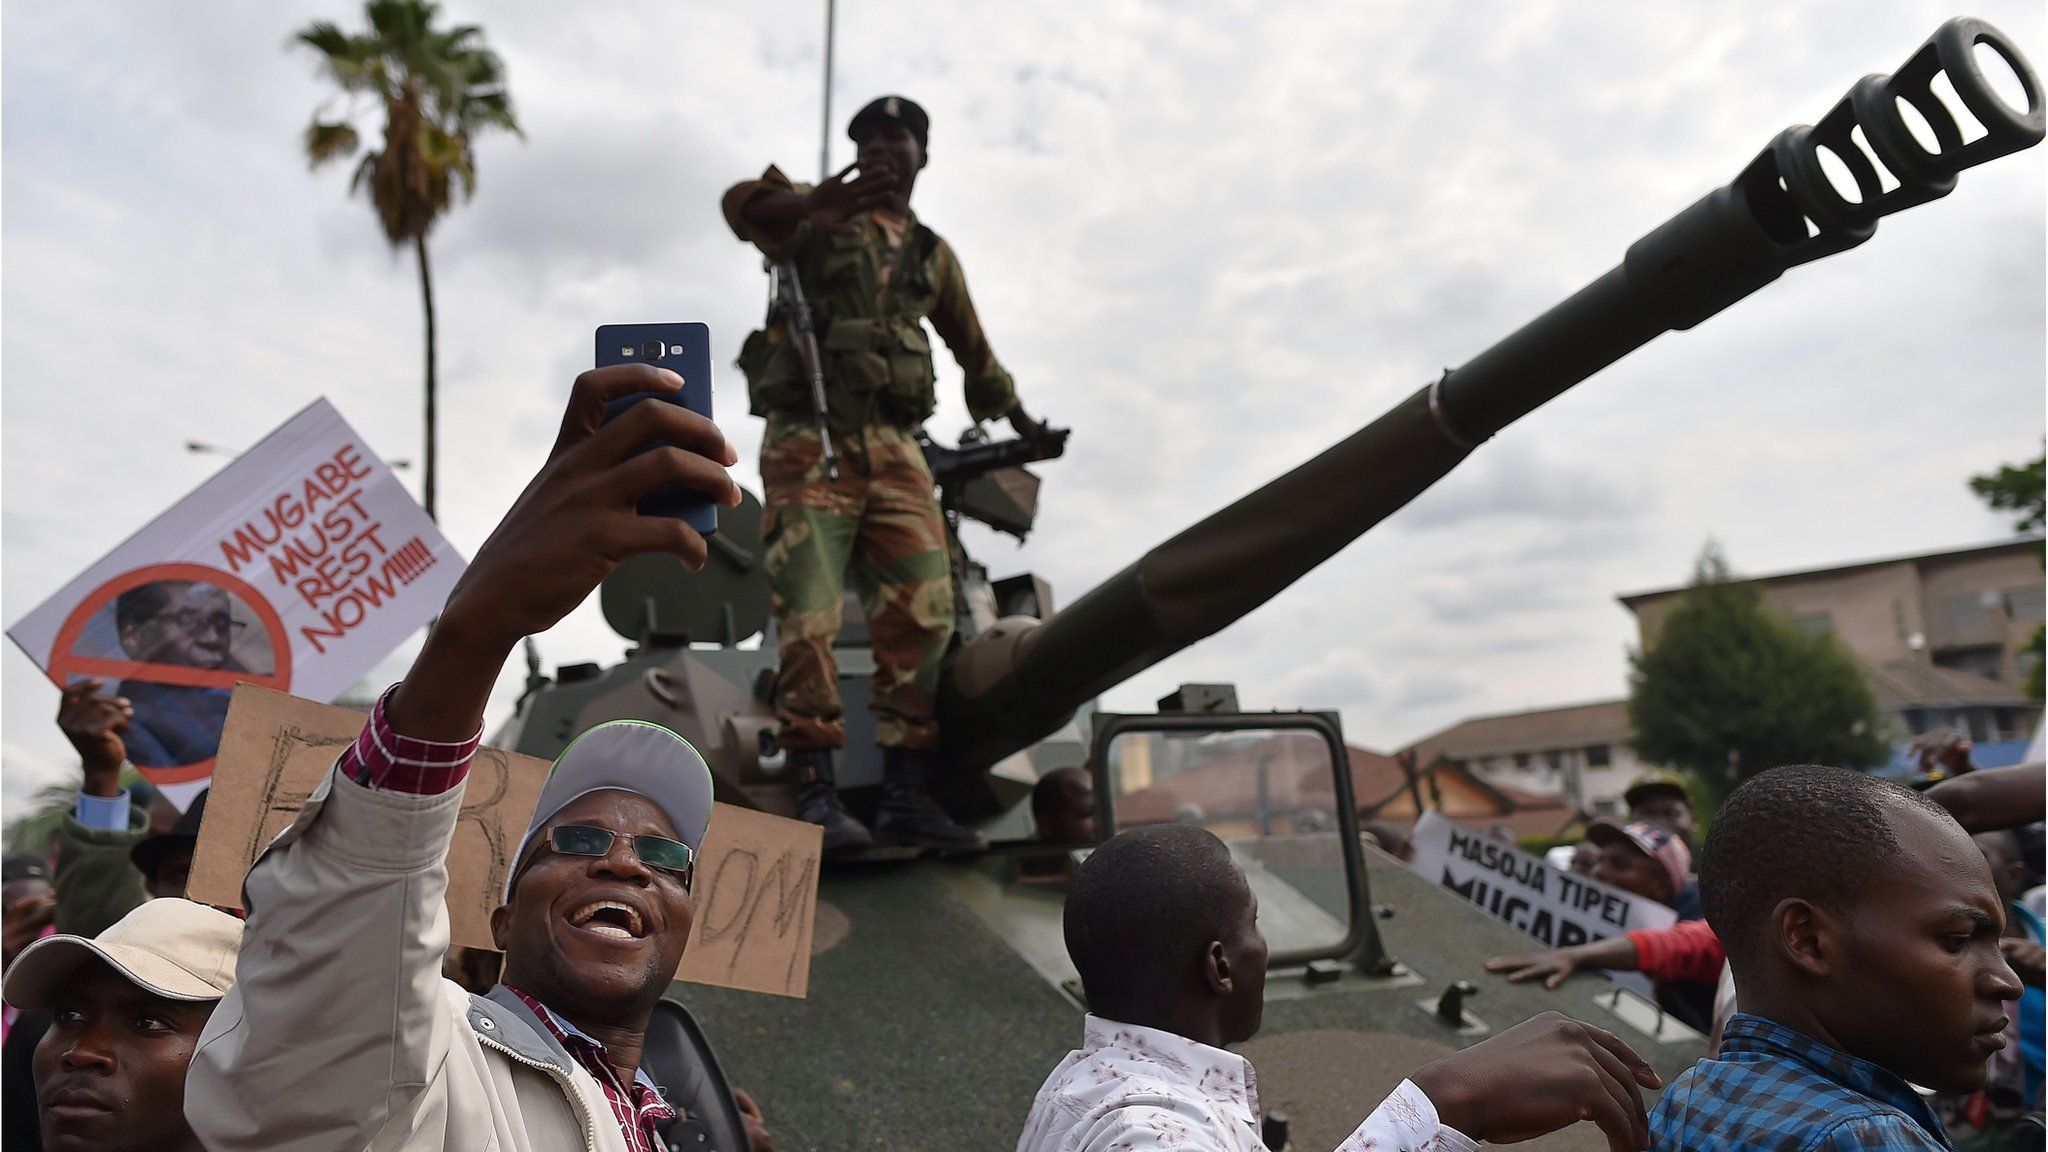 A man takes a selfie of a Zimbabwean Defence Force soldier standing on a tank during a march in the streets of Harare